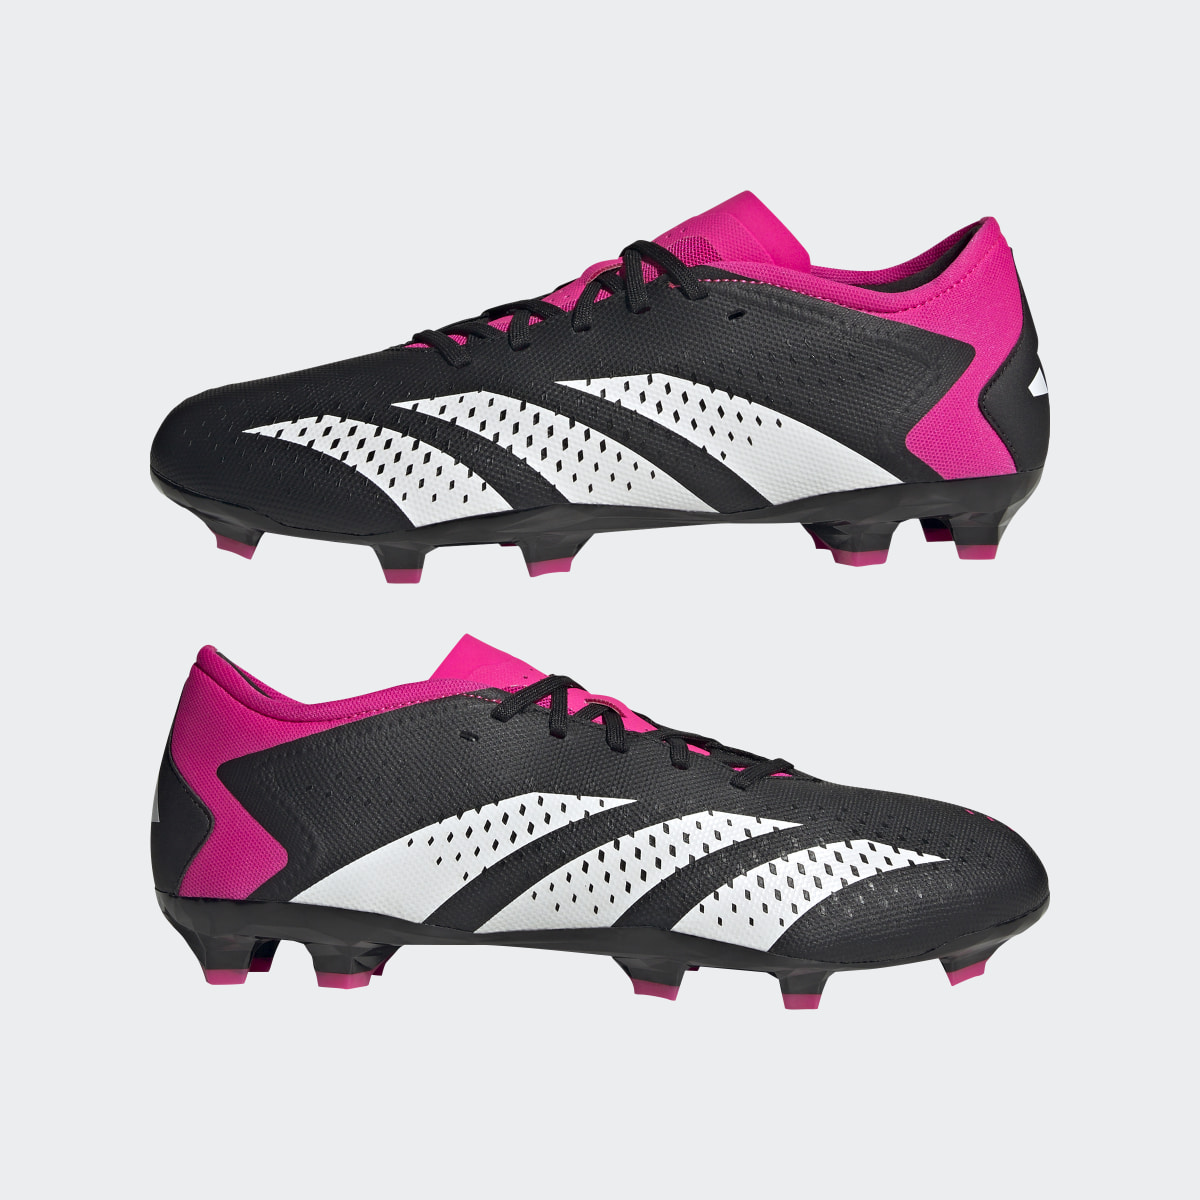 Adidas Predator Accuracy.3 Low Firm Ground Boots. 8